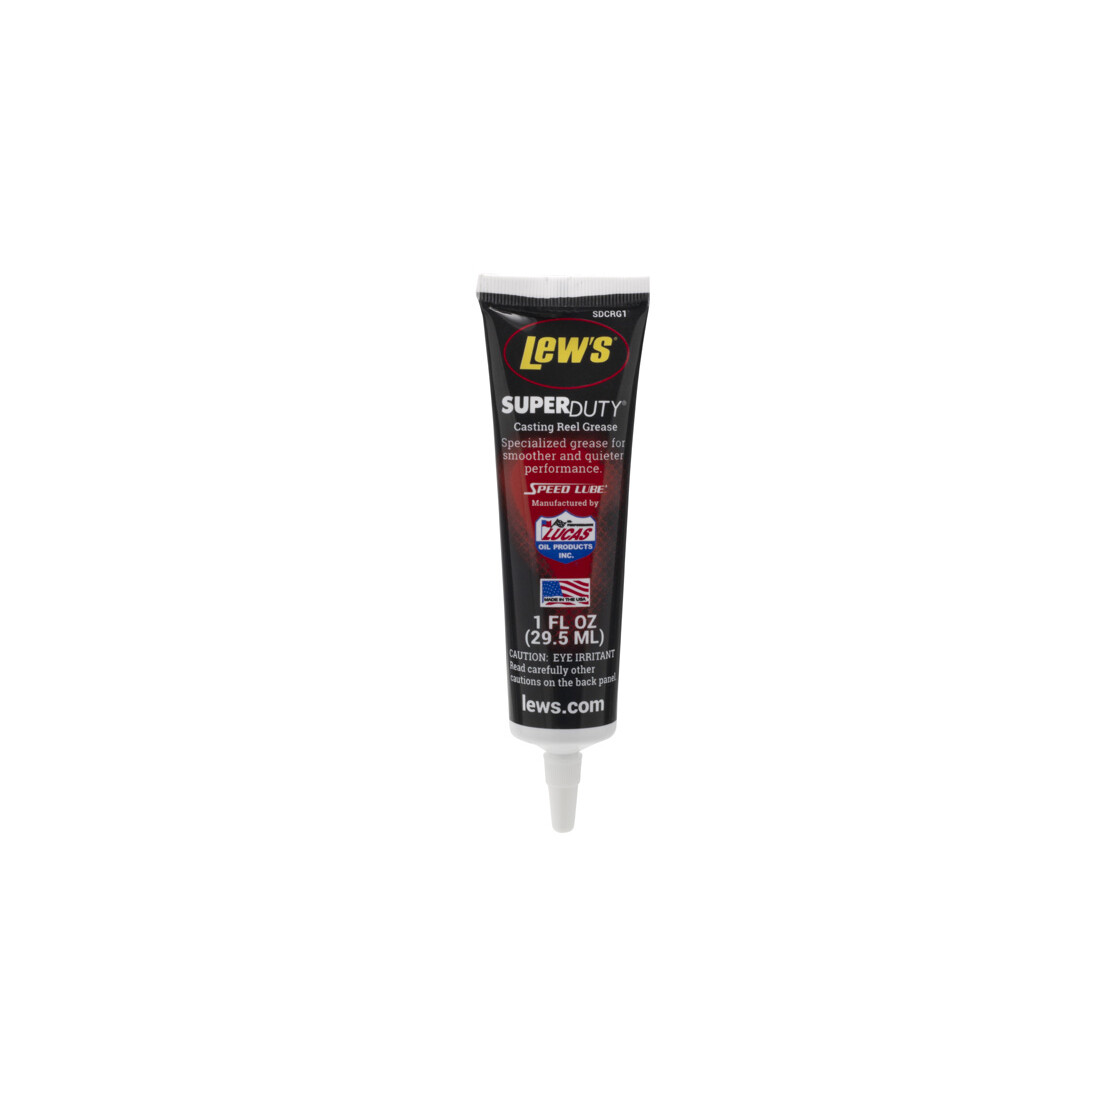 Lew's® SuperDuty Casting Reel Grease, 7,99 €